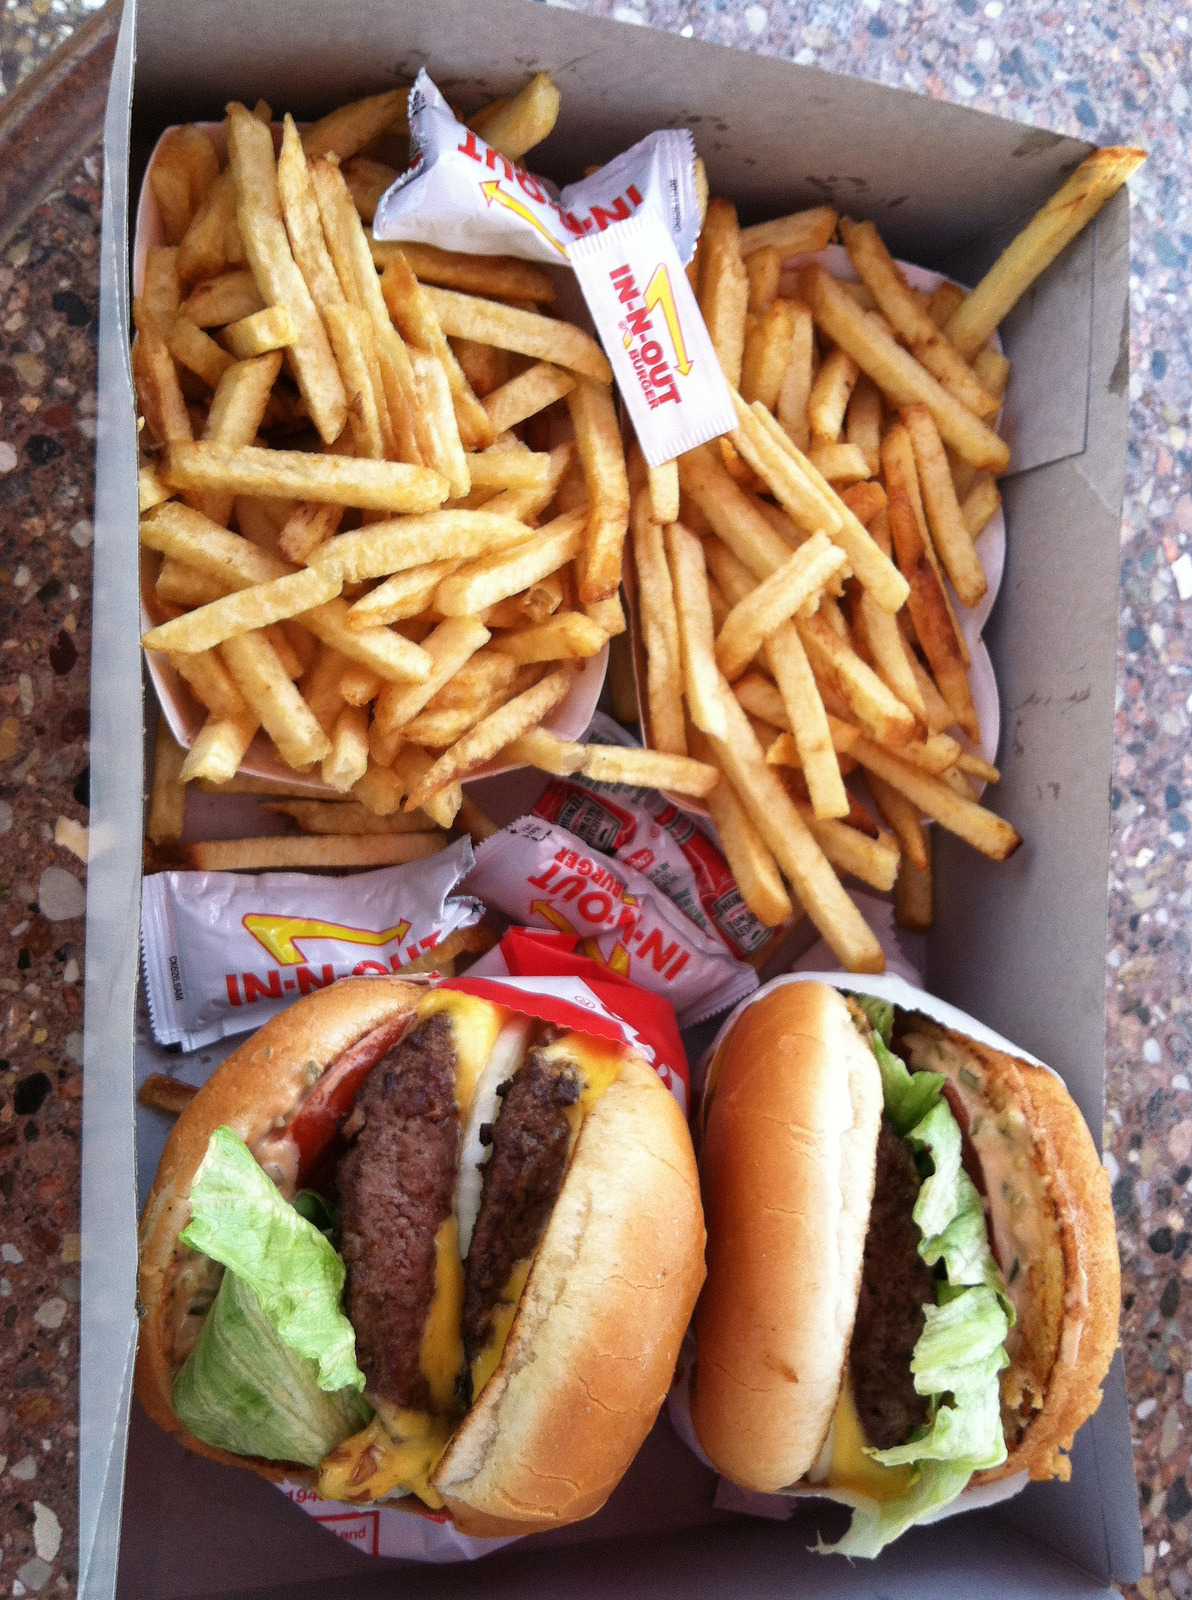 in n out burgers (by Andy961)